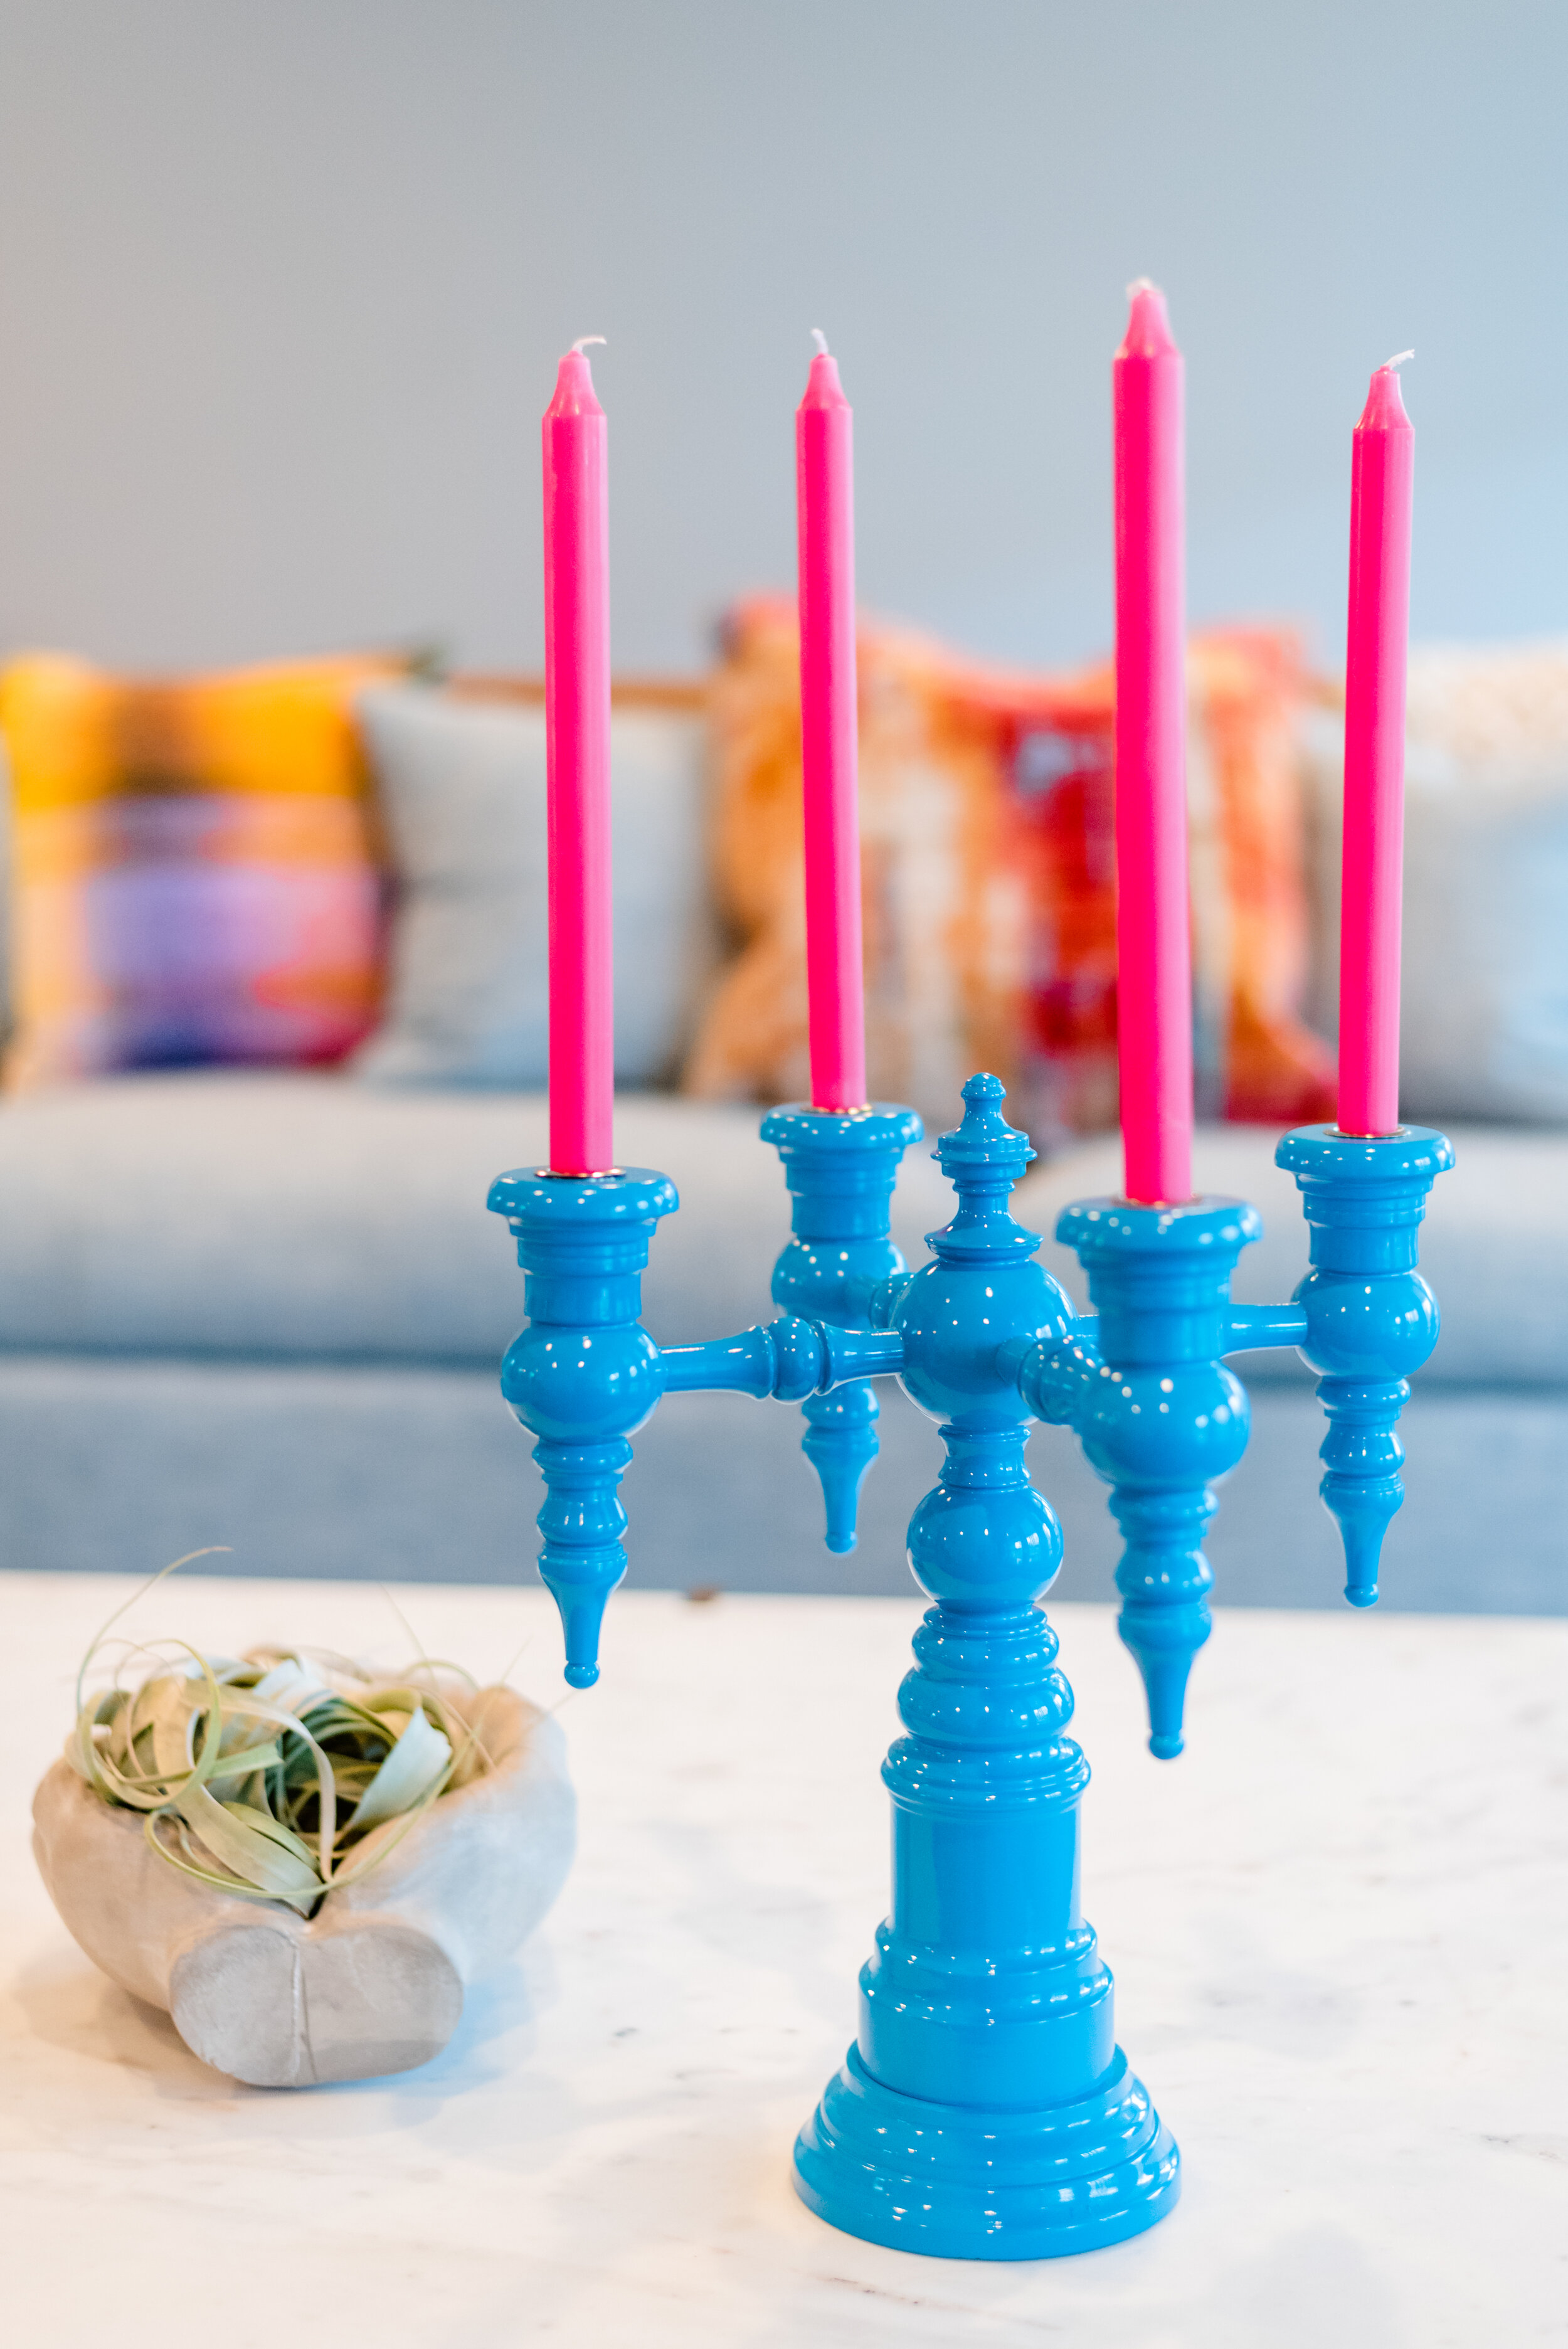 Dwell-Chic-Colorful-Living-Room-Candleabra.jpg